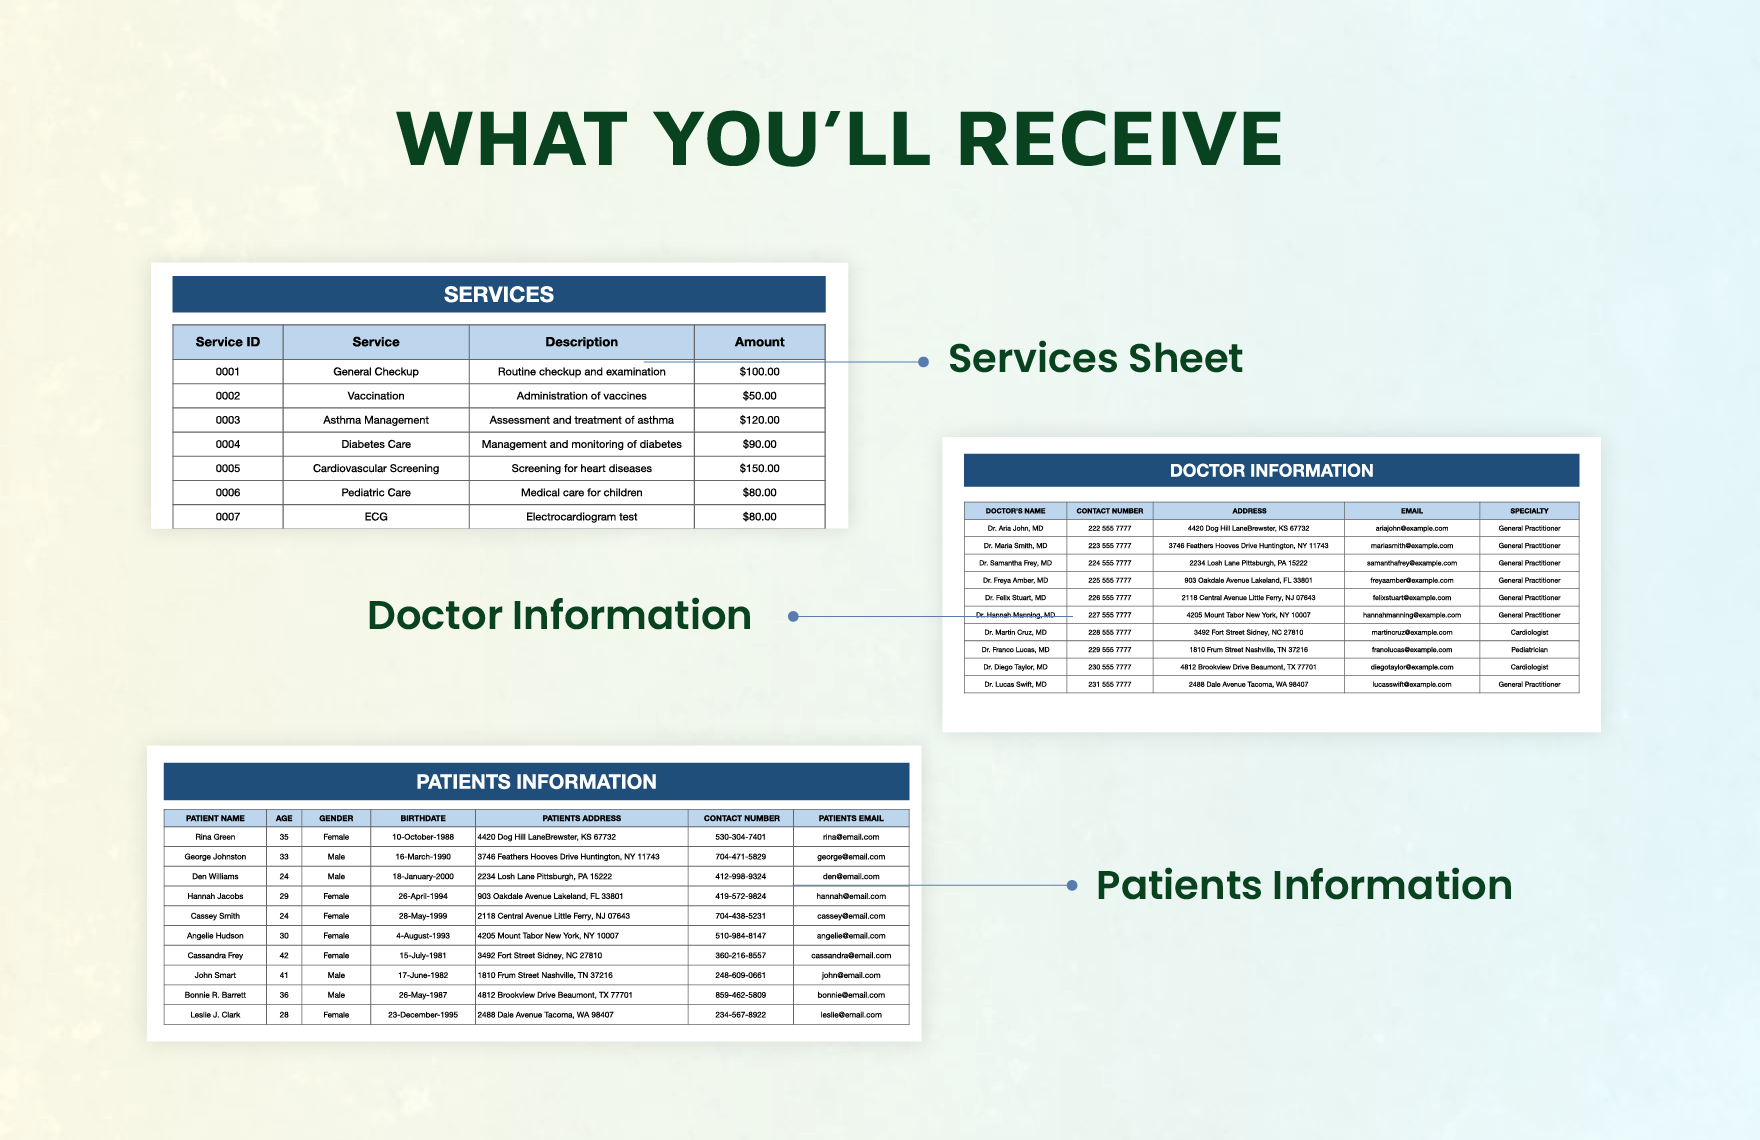 Doctor Invoice Template